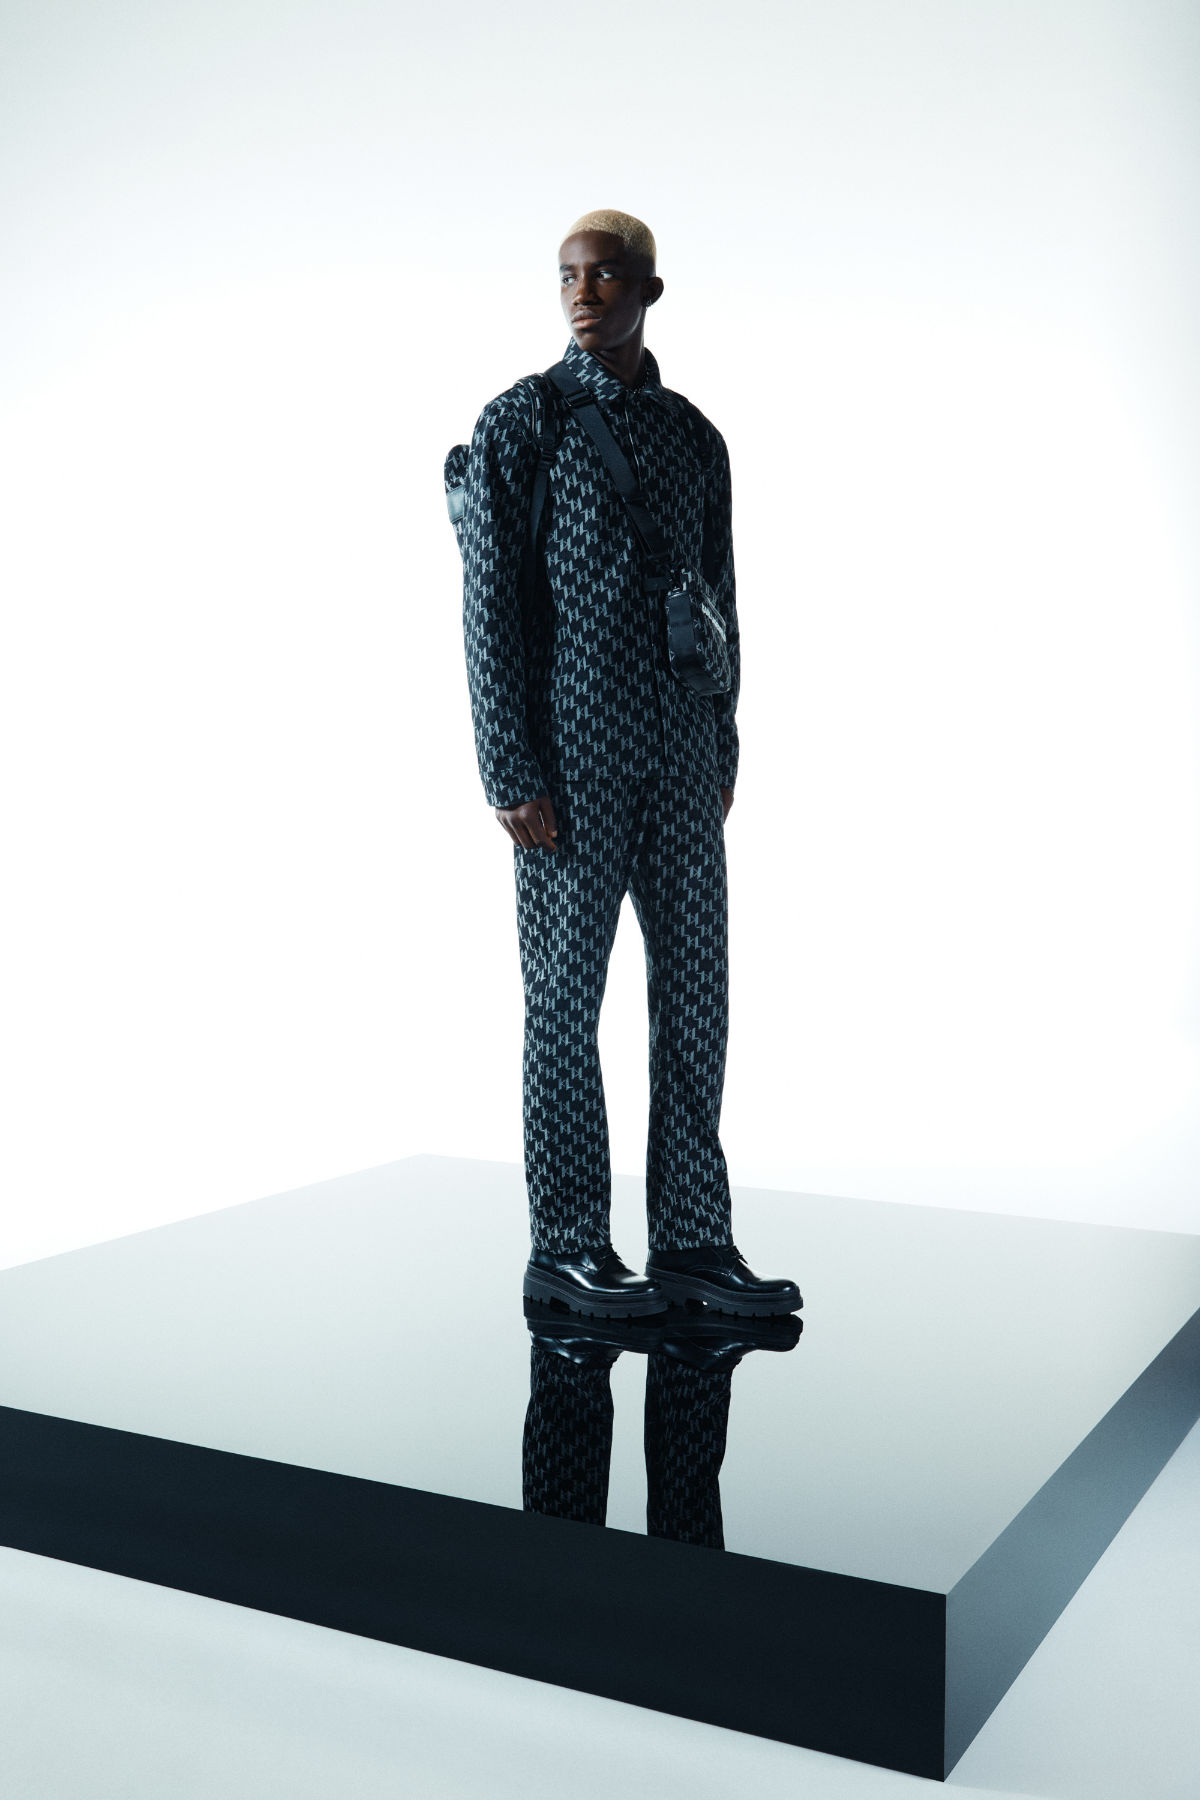 Karl Lagerfeld Presents Its Fall-Winter 2022 Menswear Collection